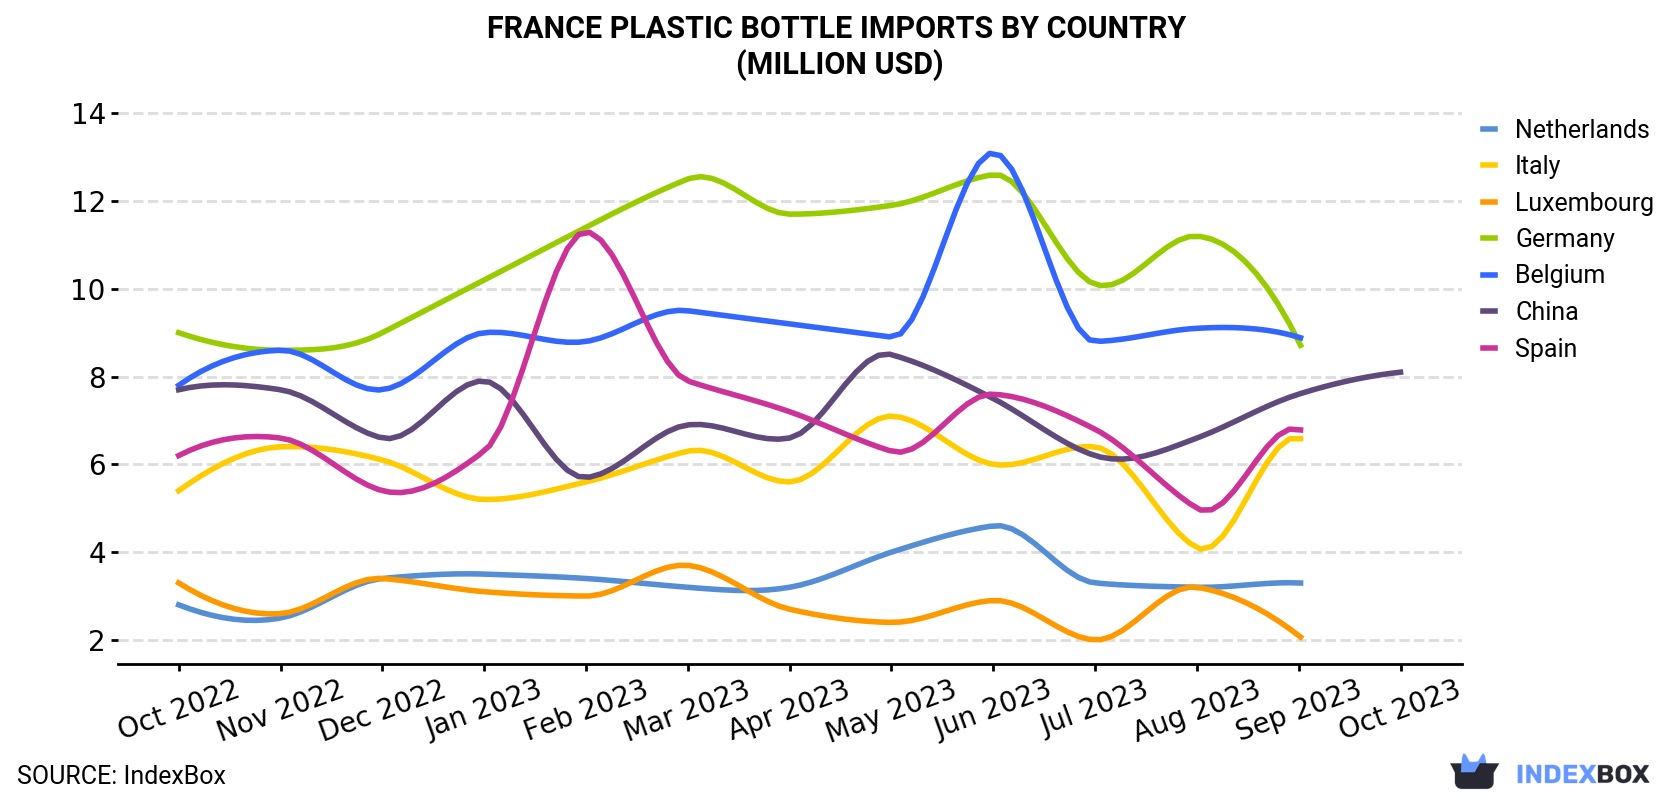 France Plastic Bottle Imports By Country (Million USD)